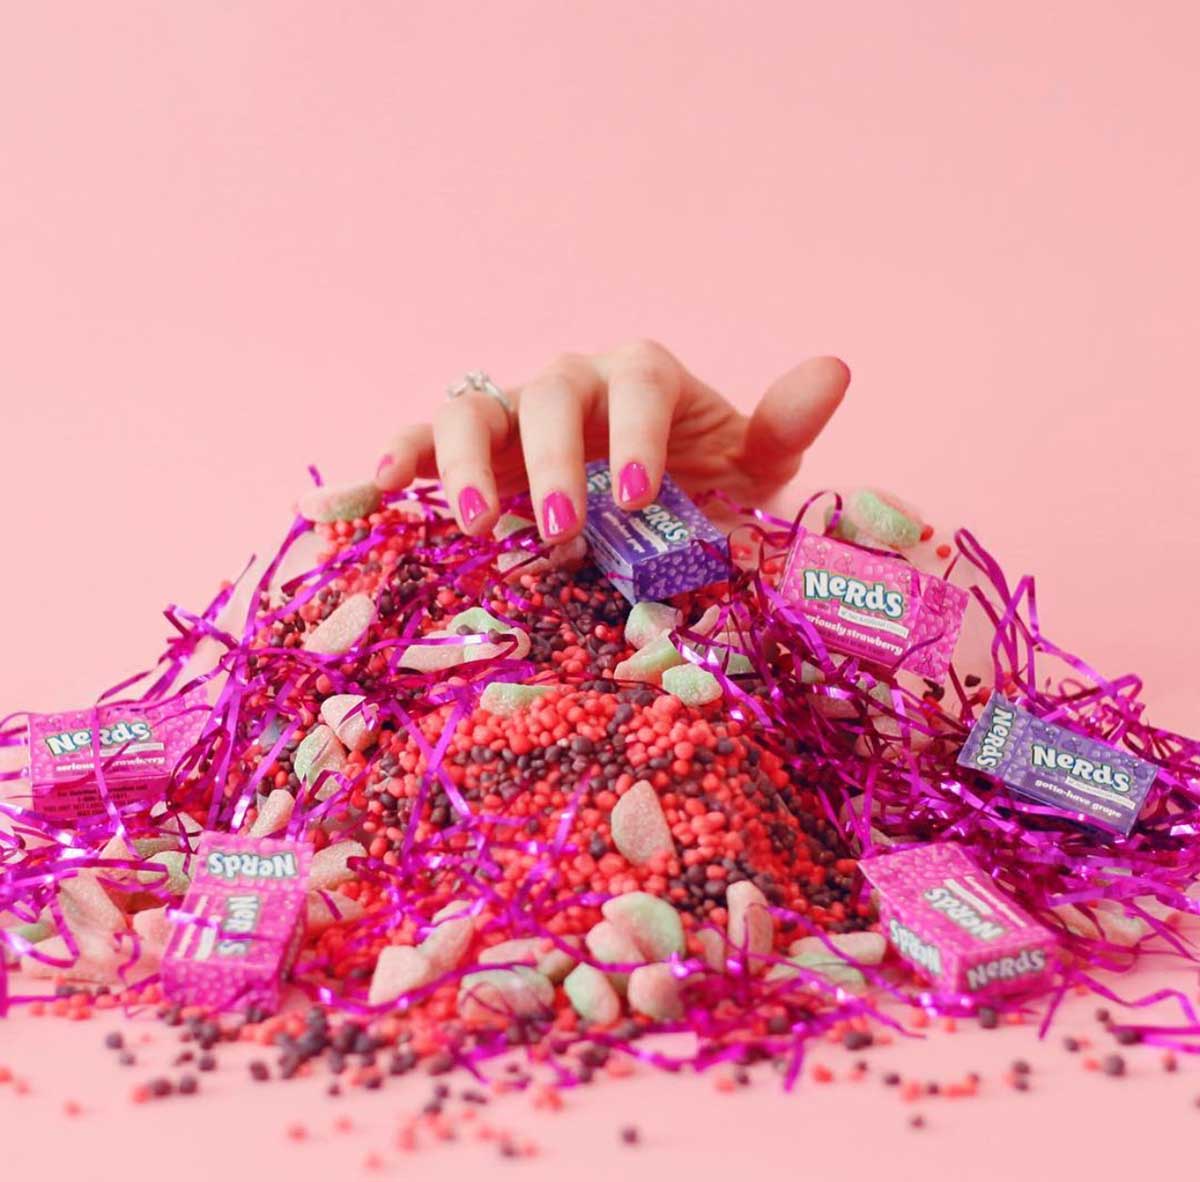 Meet I Have This Thing With Pink Content Creator Kyla Herbes this is the portfolio work she has completed for the candy brand InSugar